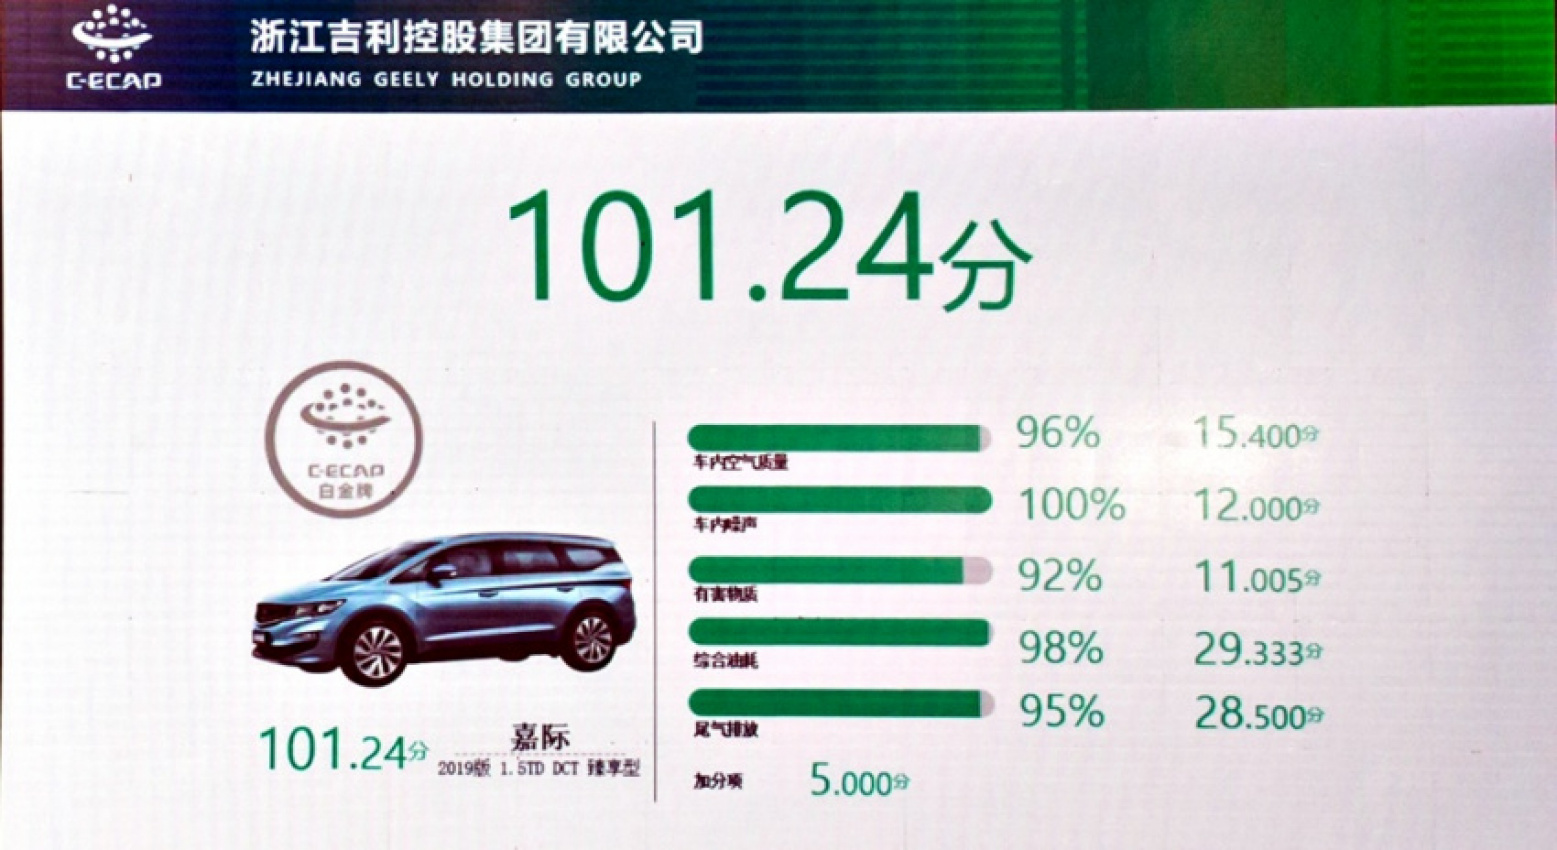 autos, cars, geely, ram, china eco-car assessment program, geely auto group, noise vibration and harshness, nvh laboratory, product development, china eco-car assessment program makes geely work harder at attacking nvh